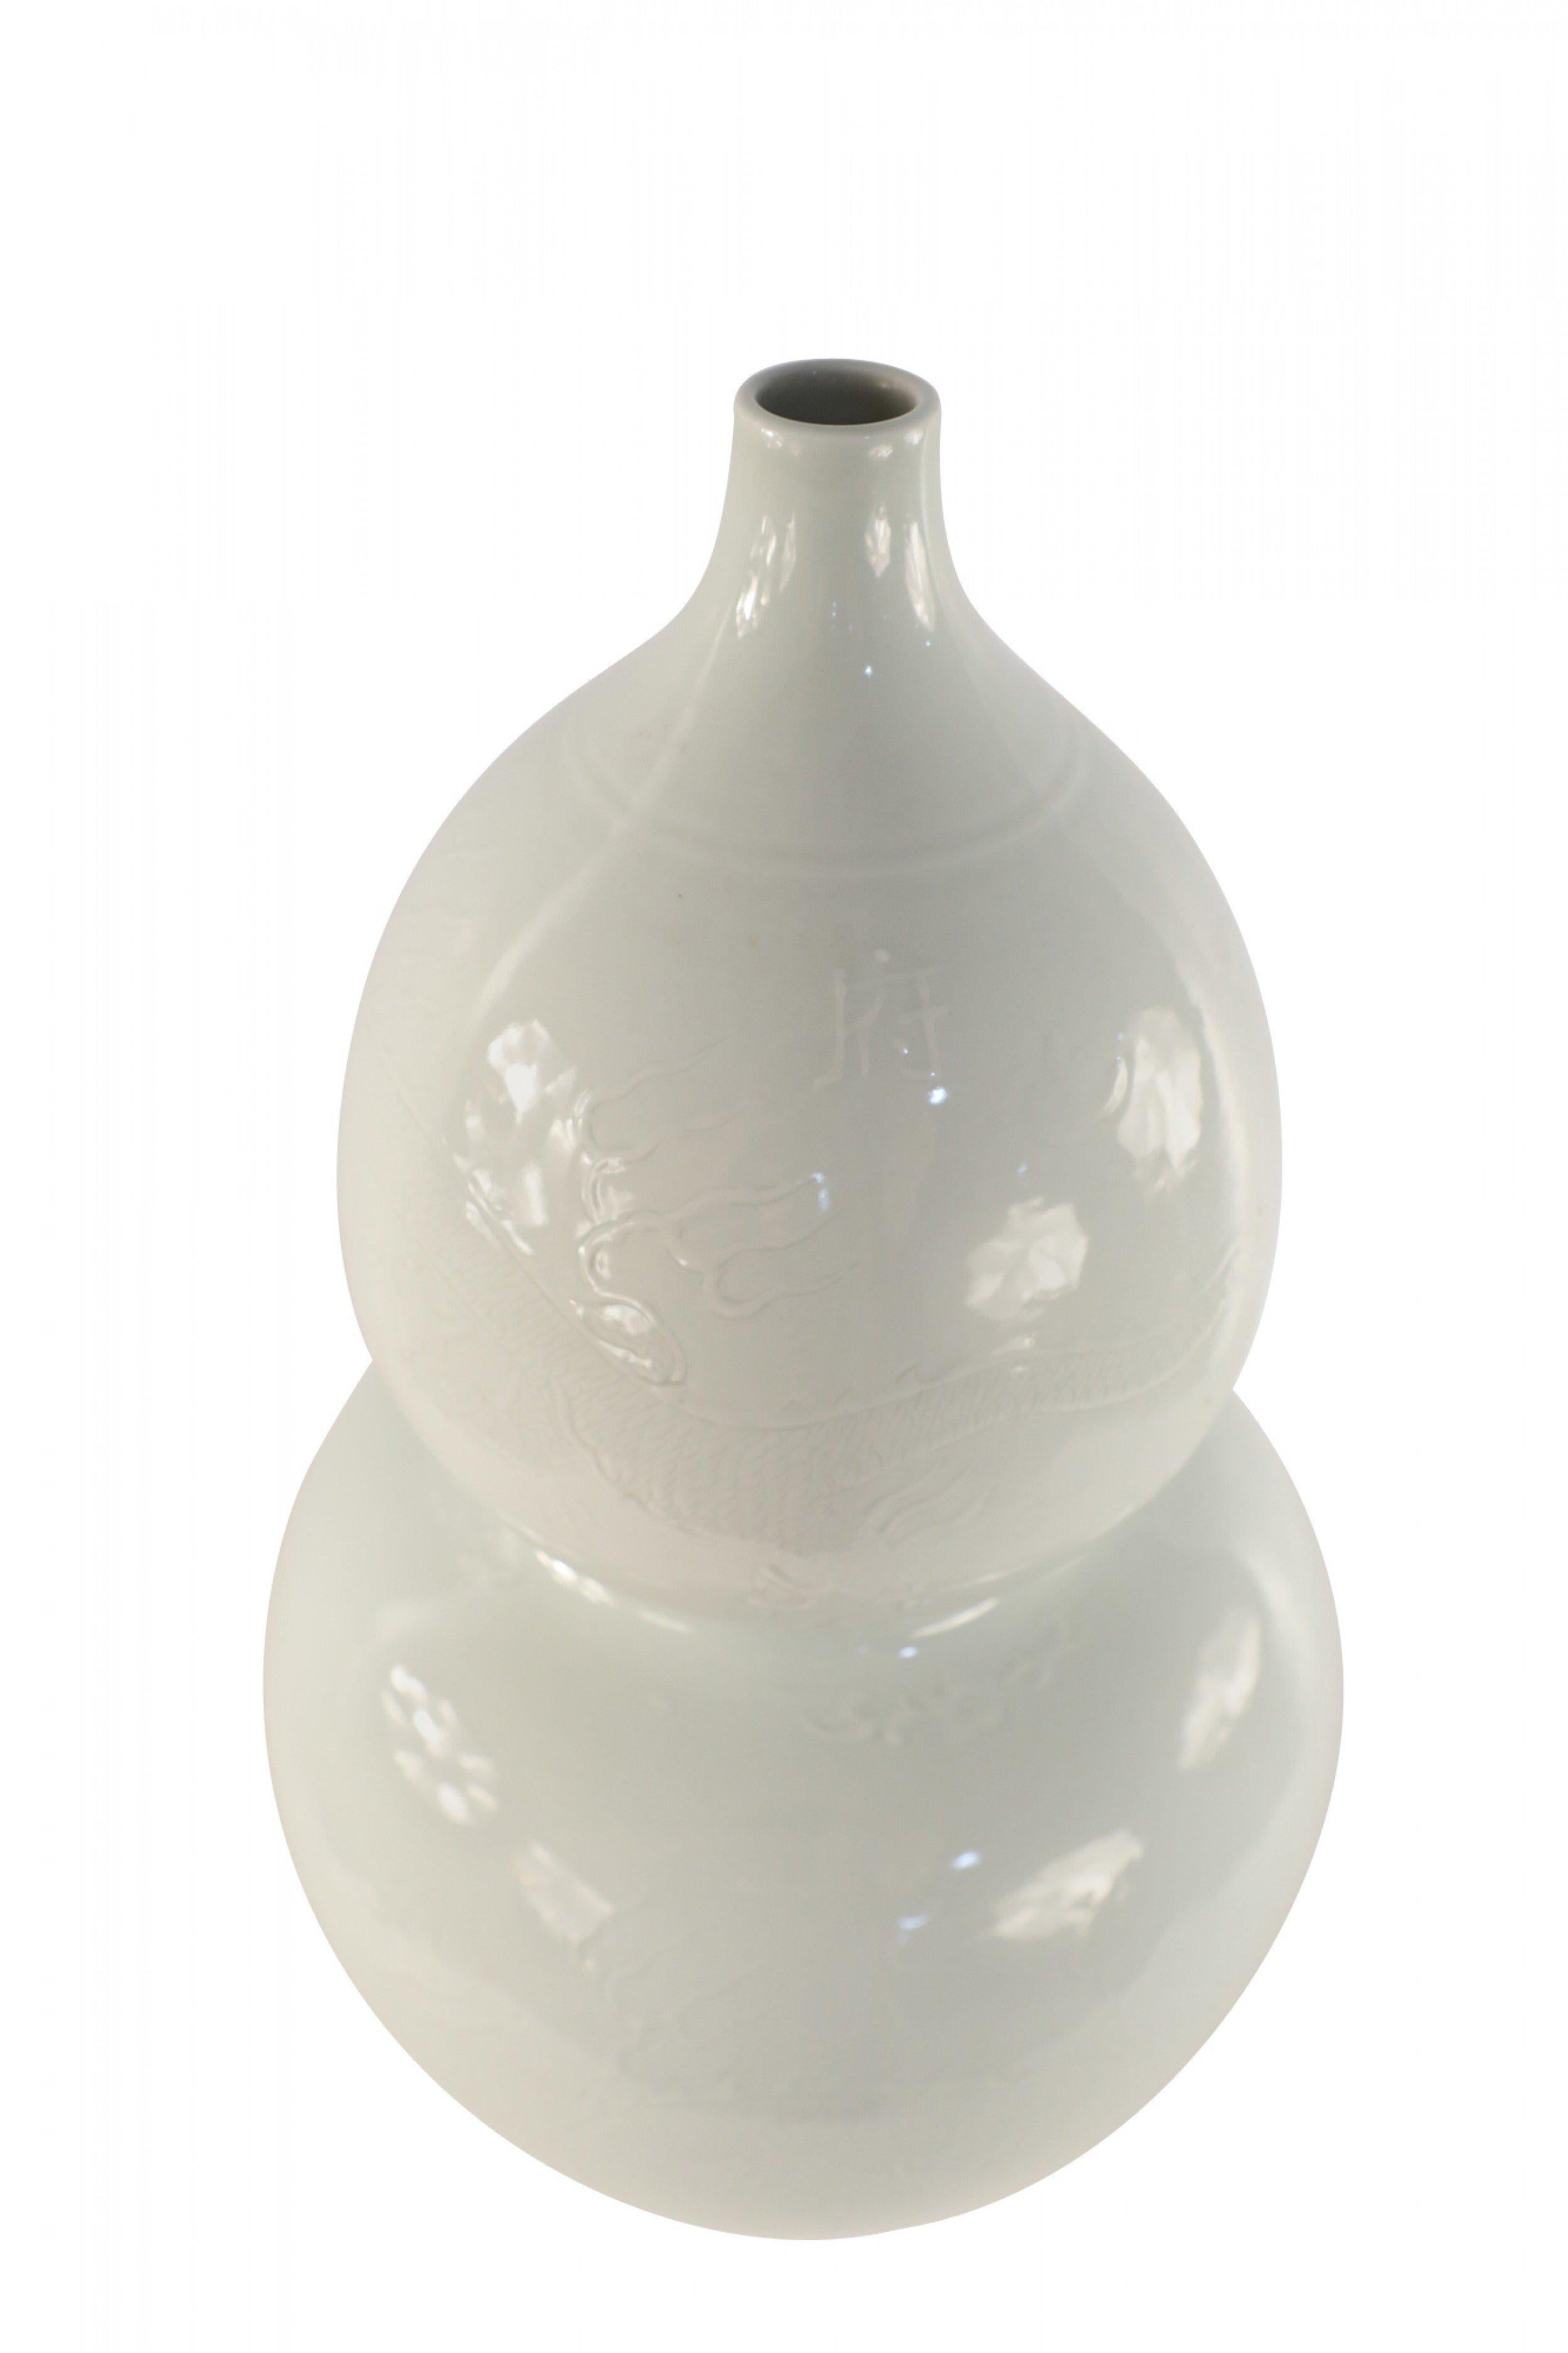 Chinese white, glazed porcelain double gourd bottle thought to bring peace, longevity and happiness to its owner, with a faint etched dragon motif.
 